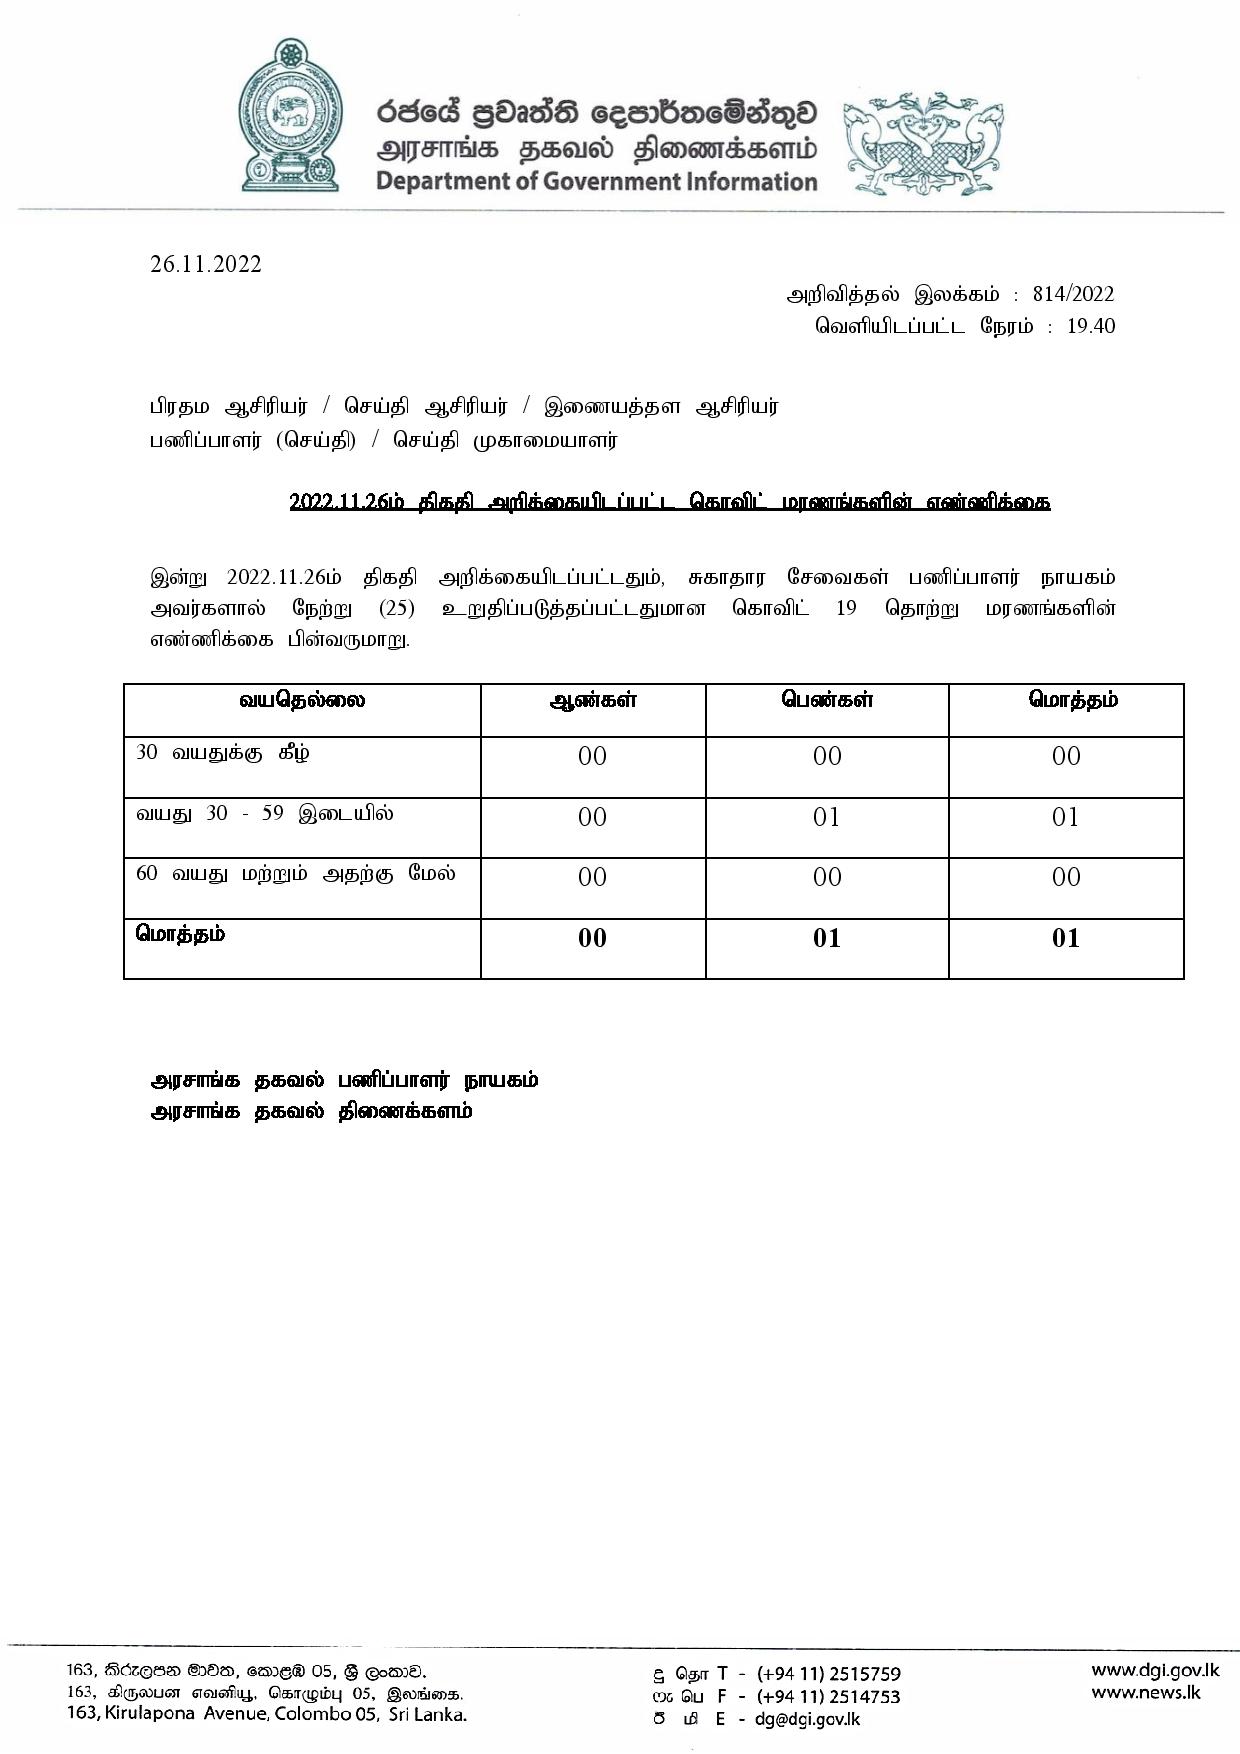 Release No 814 Tamil page 001